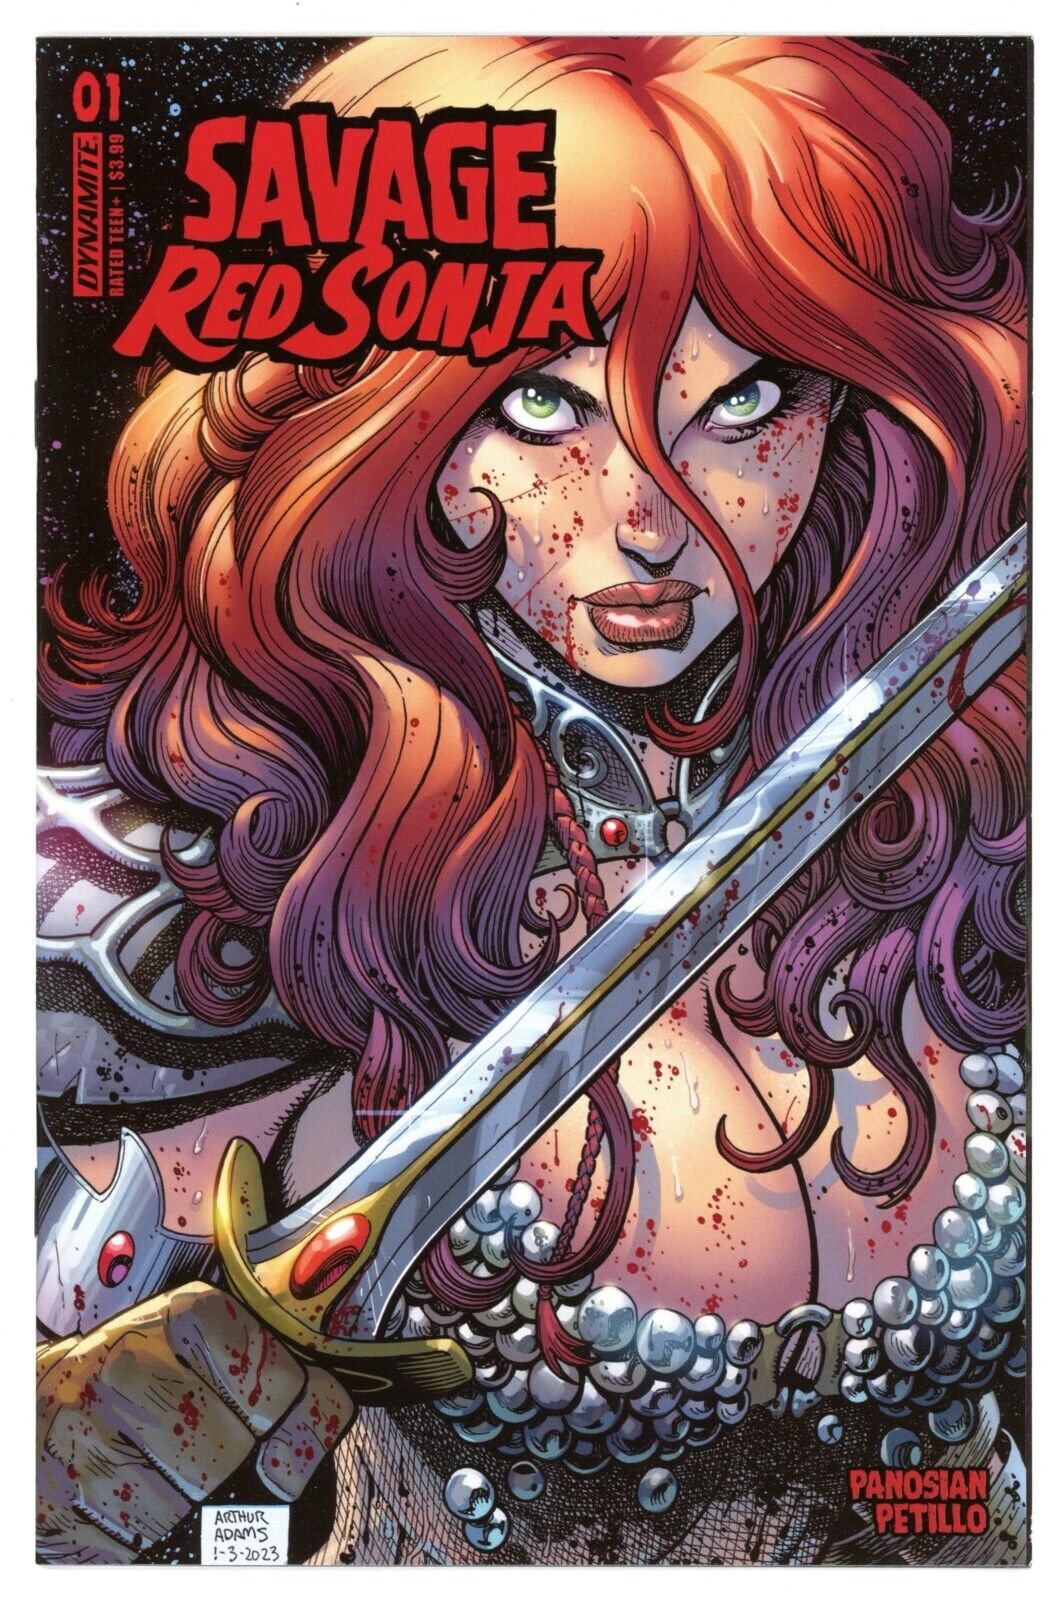 Savage Red Sonja #1    |   Cover C   |   NM  NEW   ⚔️ NO STOCK PHOTOS⚔️